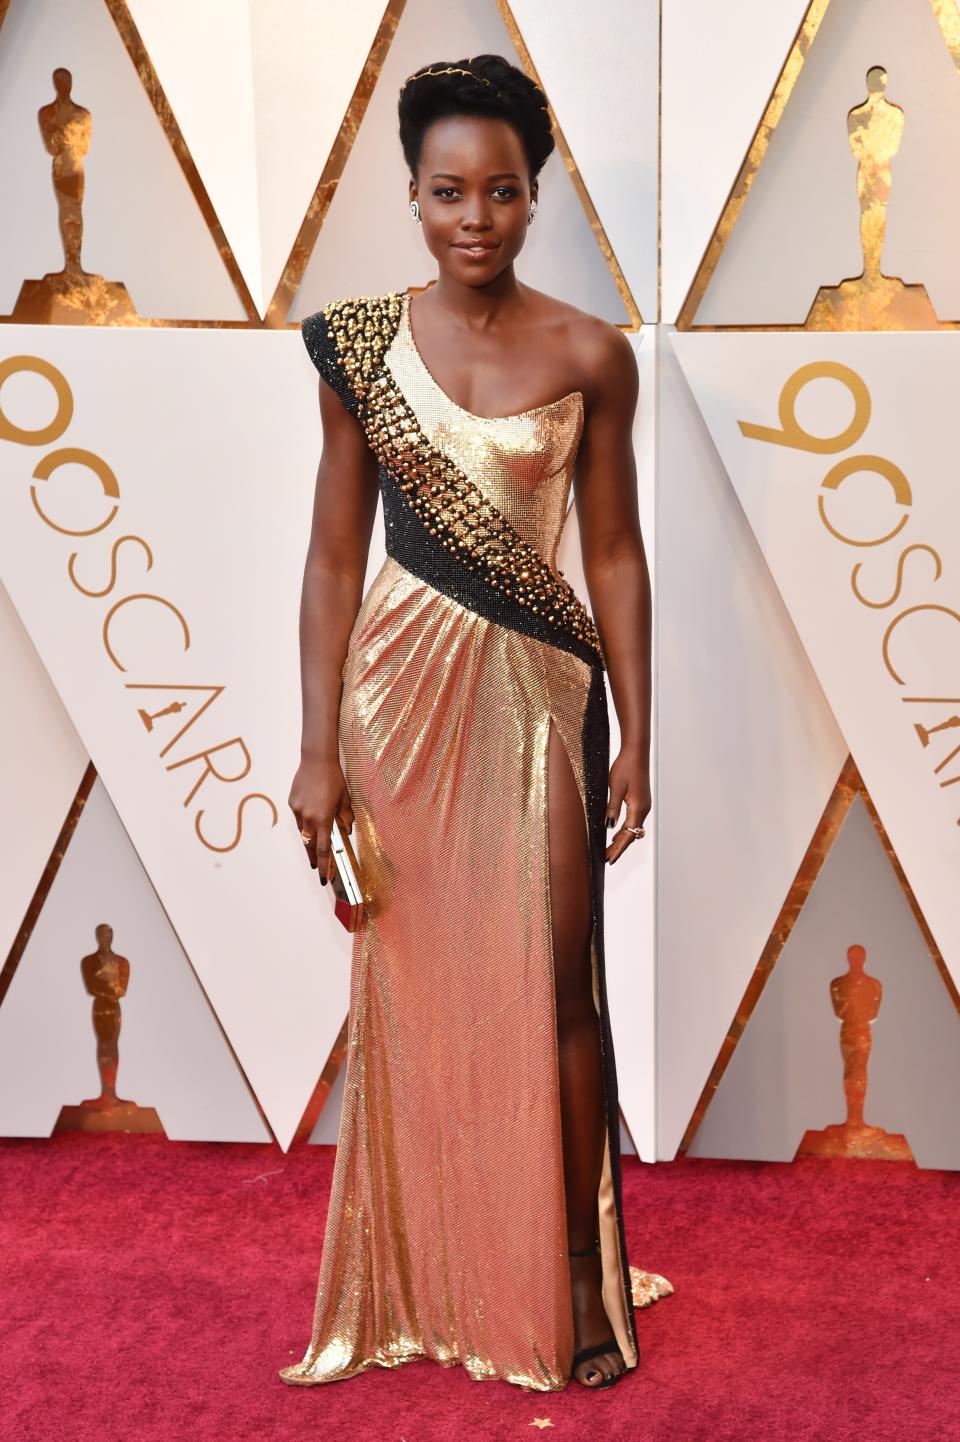 Lupita Nyong’o in custom Atelier Versace, Alexandre Birman shoes, Niwaka jewelry, and with a Versace clutch